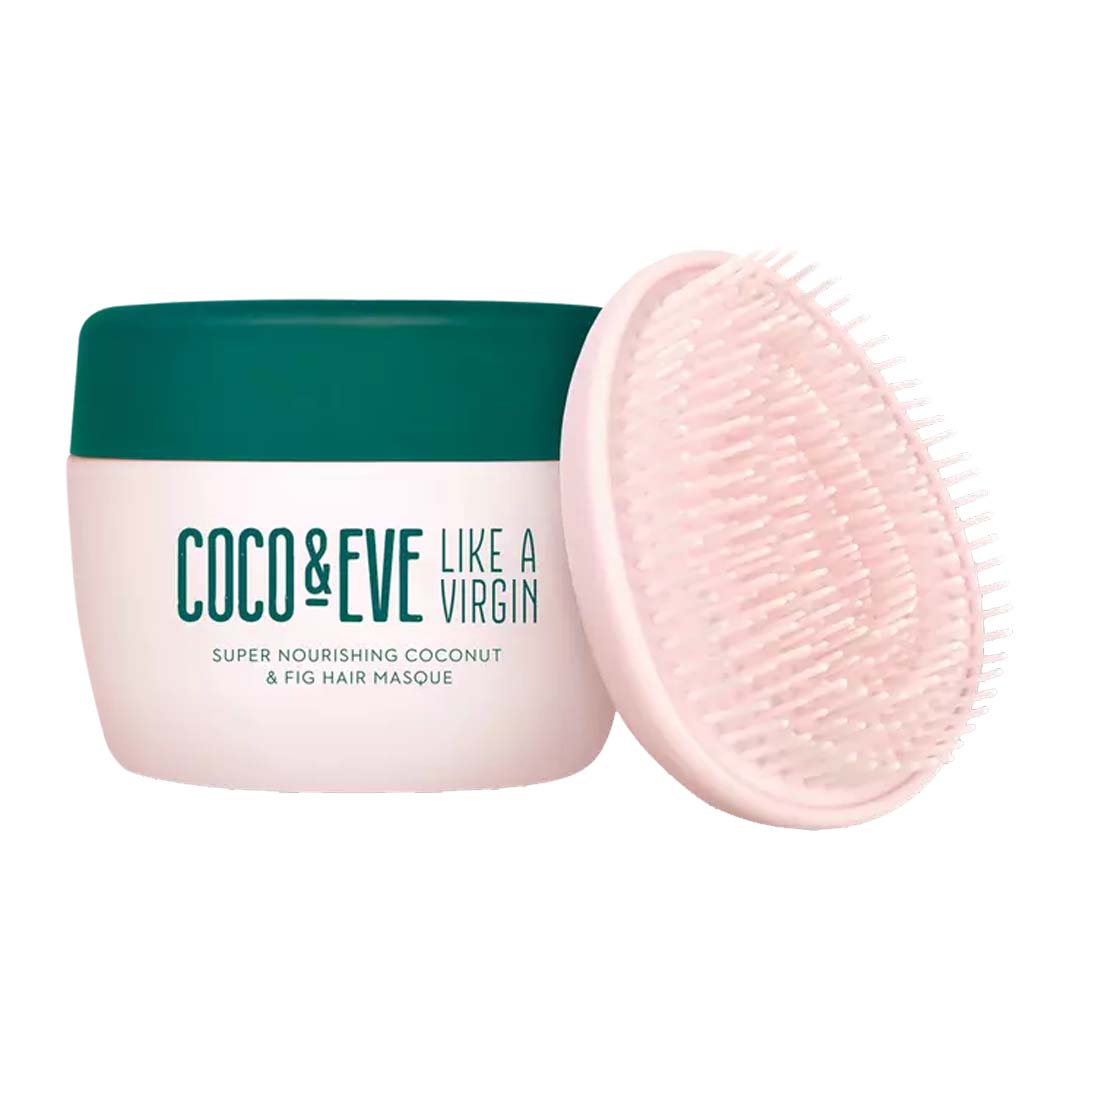 Coco & Eve Like a Virgin Hair Masque in pink and green container with brush